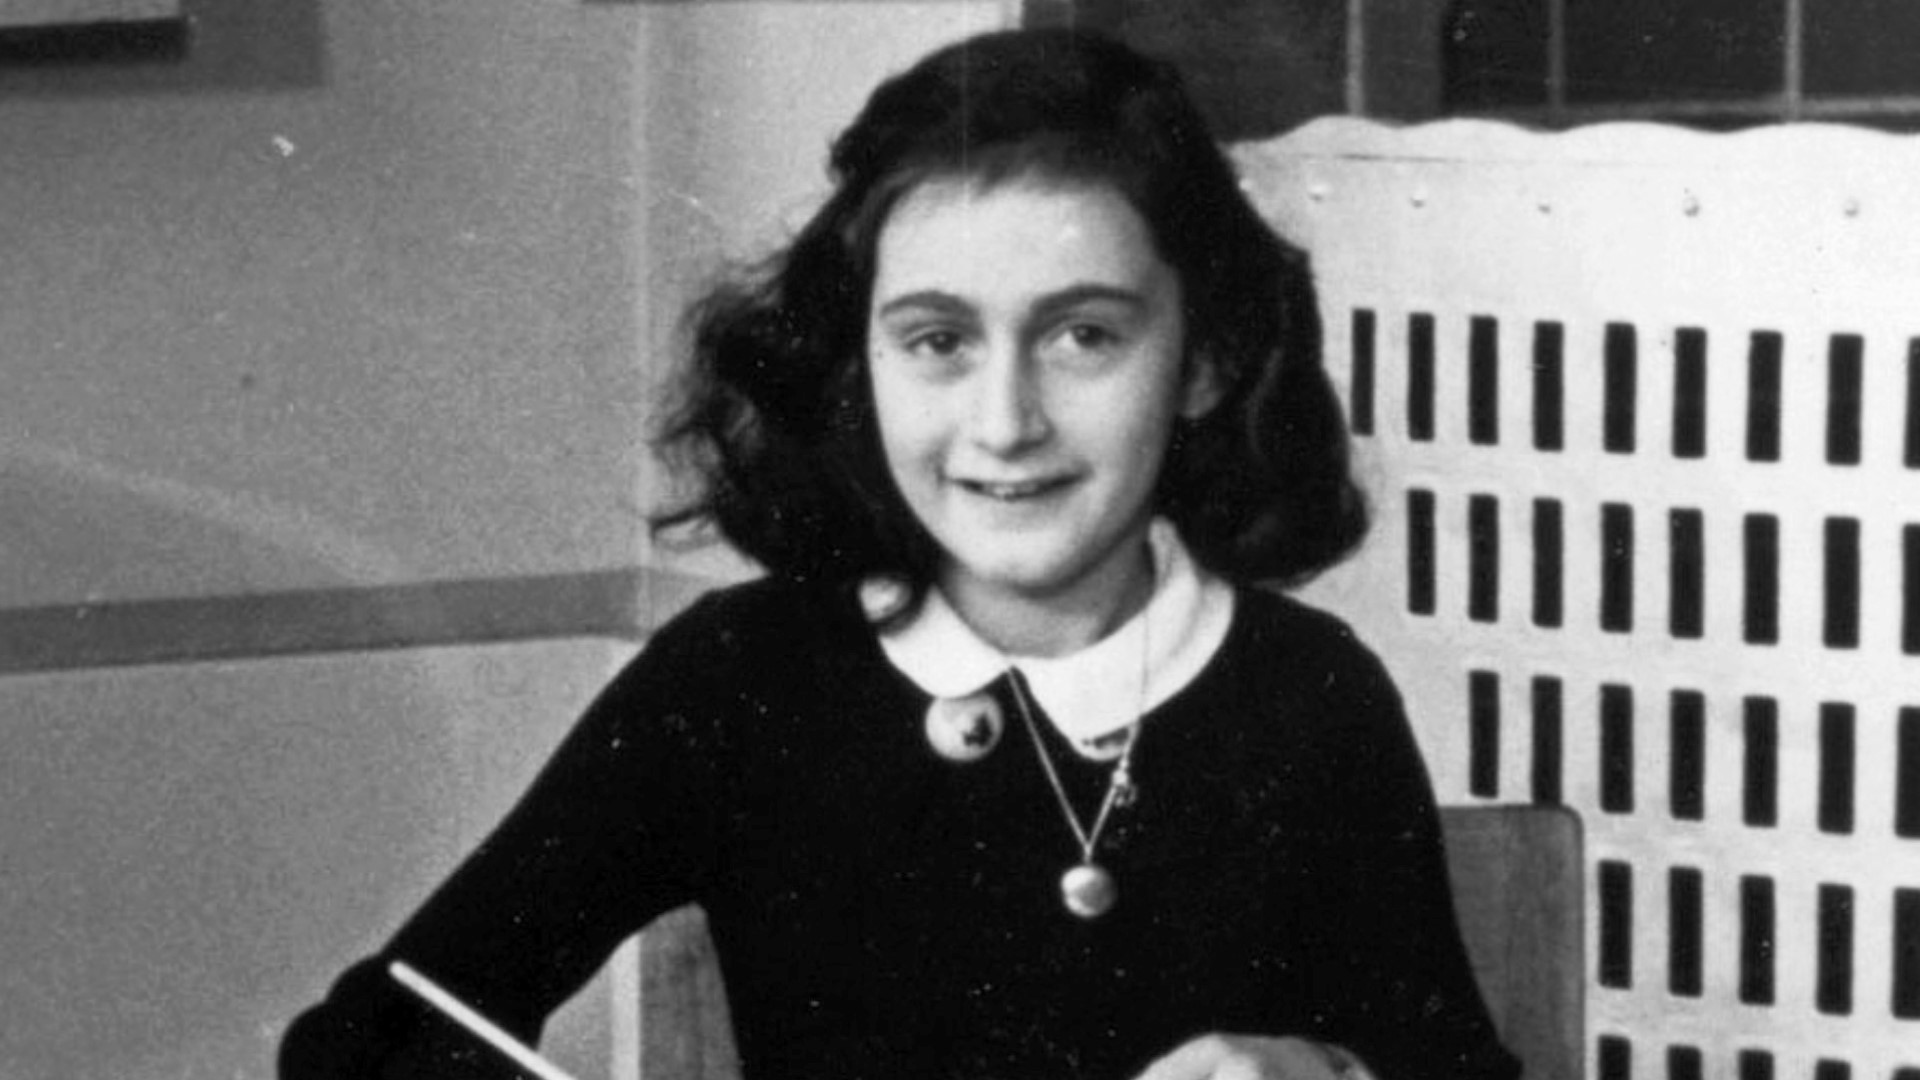 For 6 years there's been an ongoing investigation into the betrayal of Anne Frank, today we have a name. Veuer's Maria Mercedes Galuppo has the story.